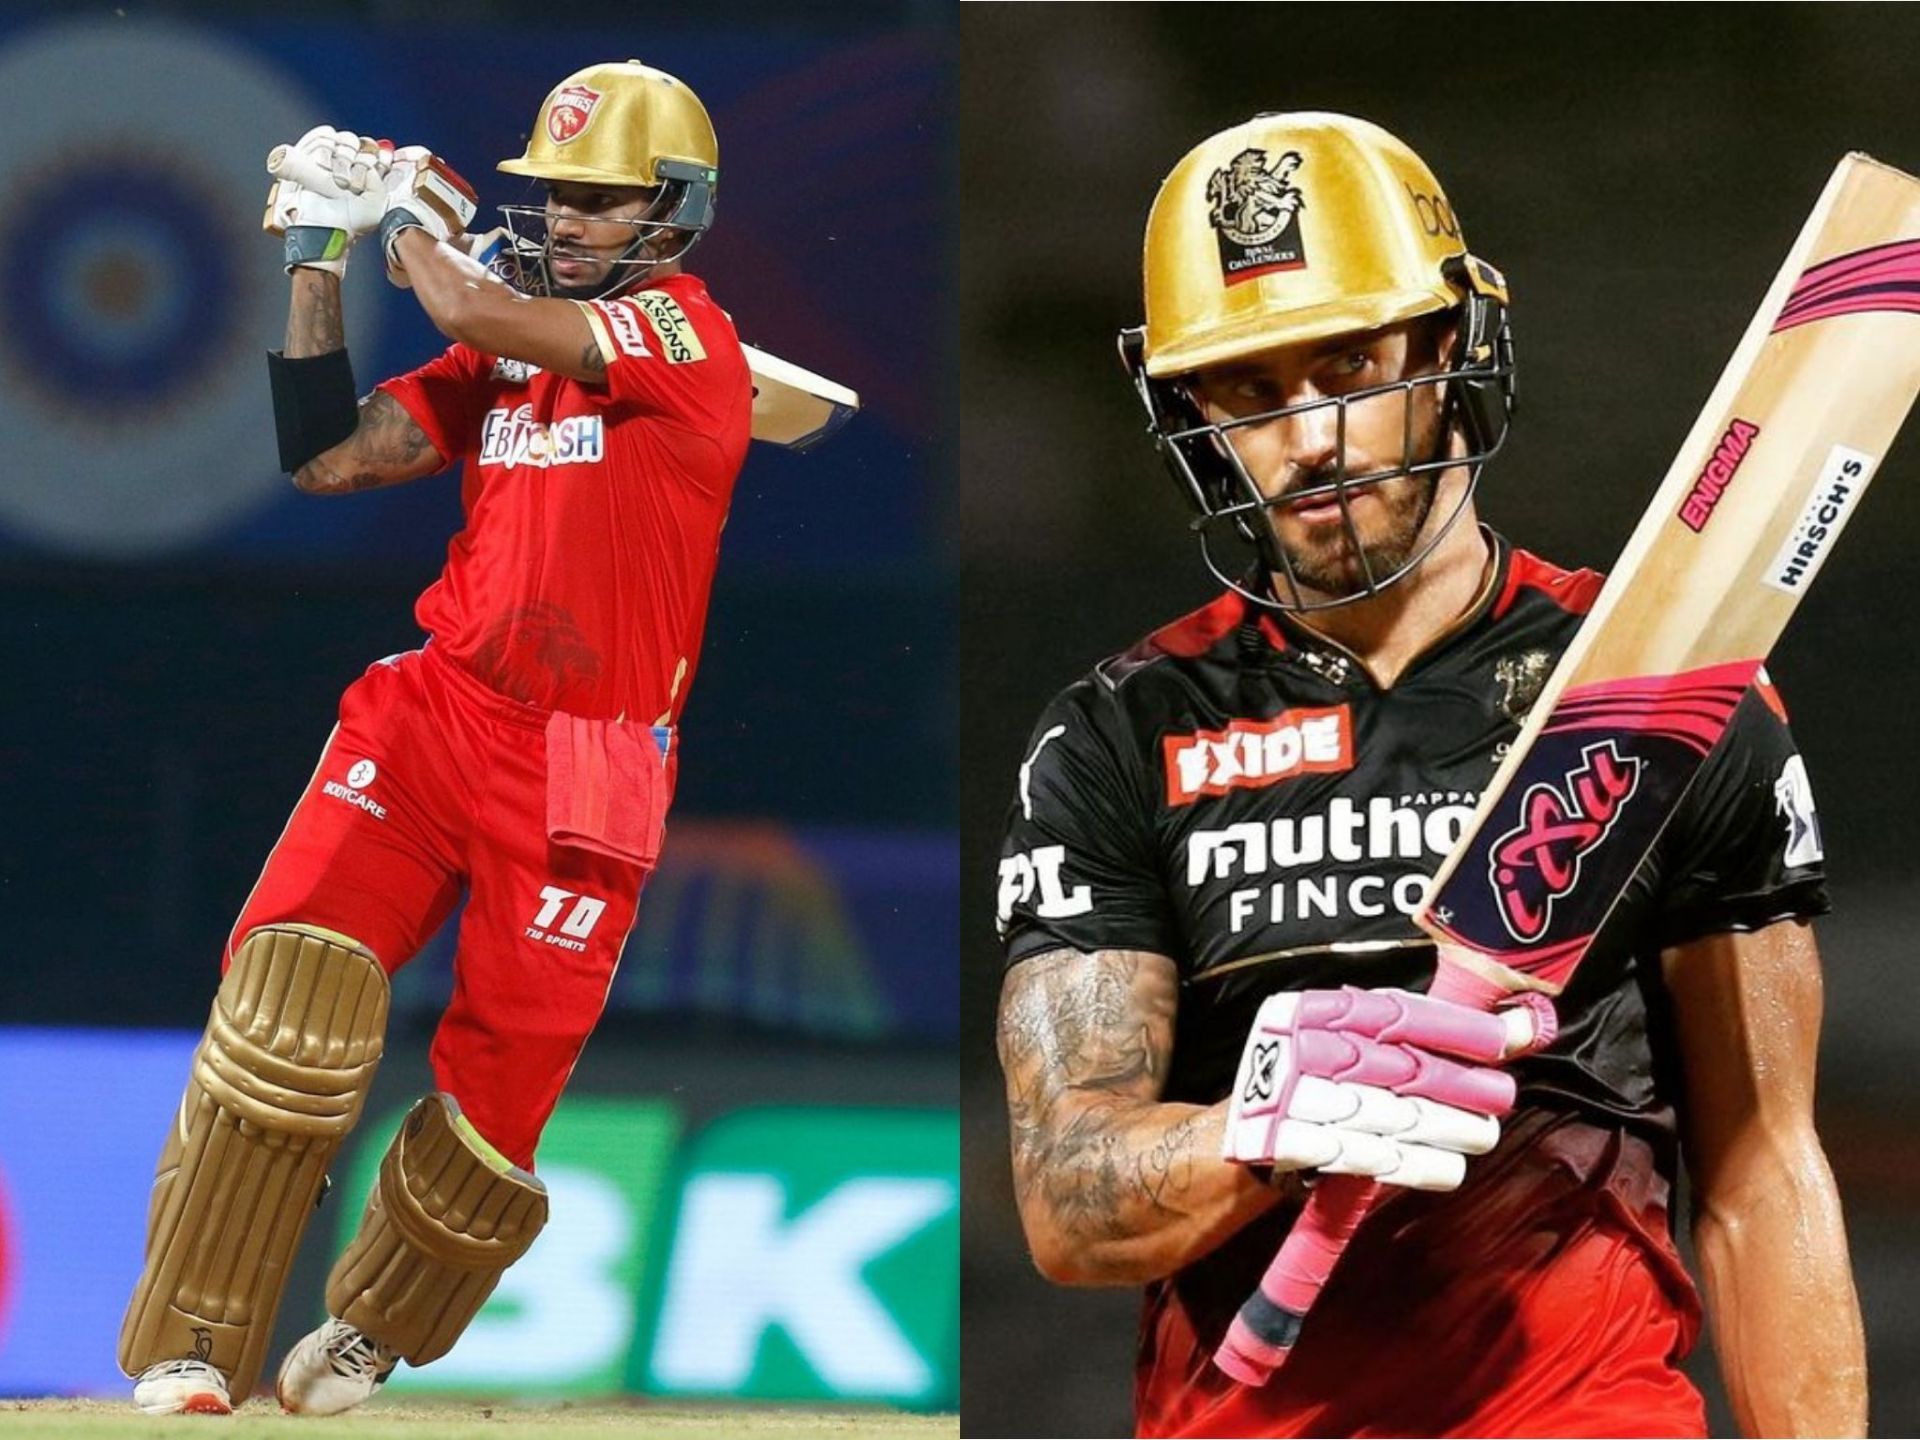 Match 60 will be played between Royal Challengers Bangalore and Punjab Kings